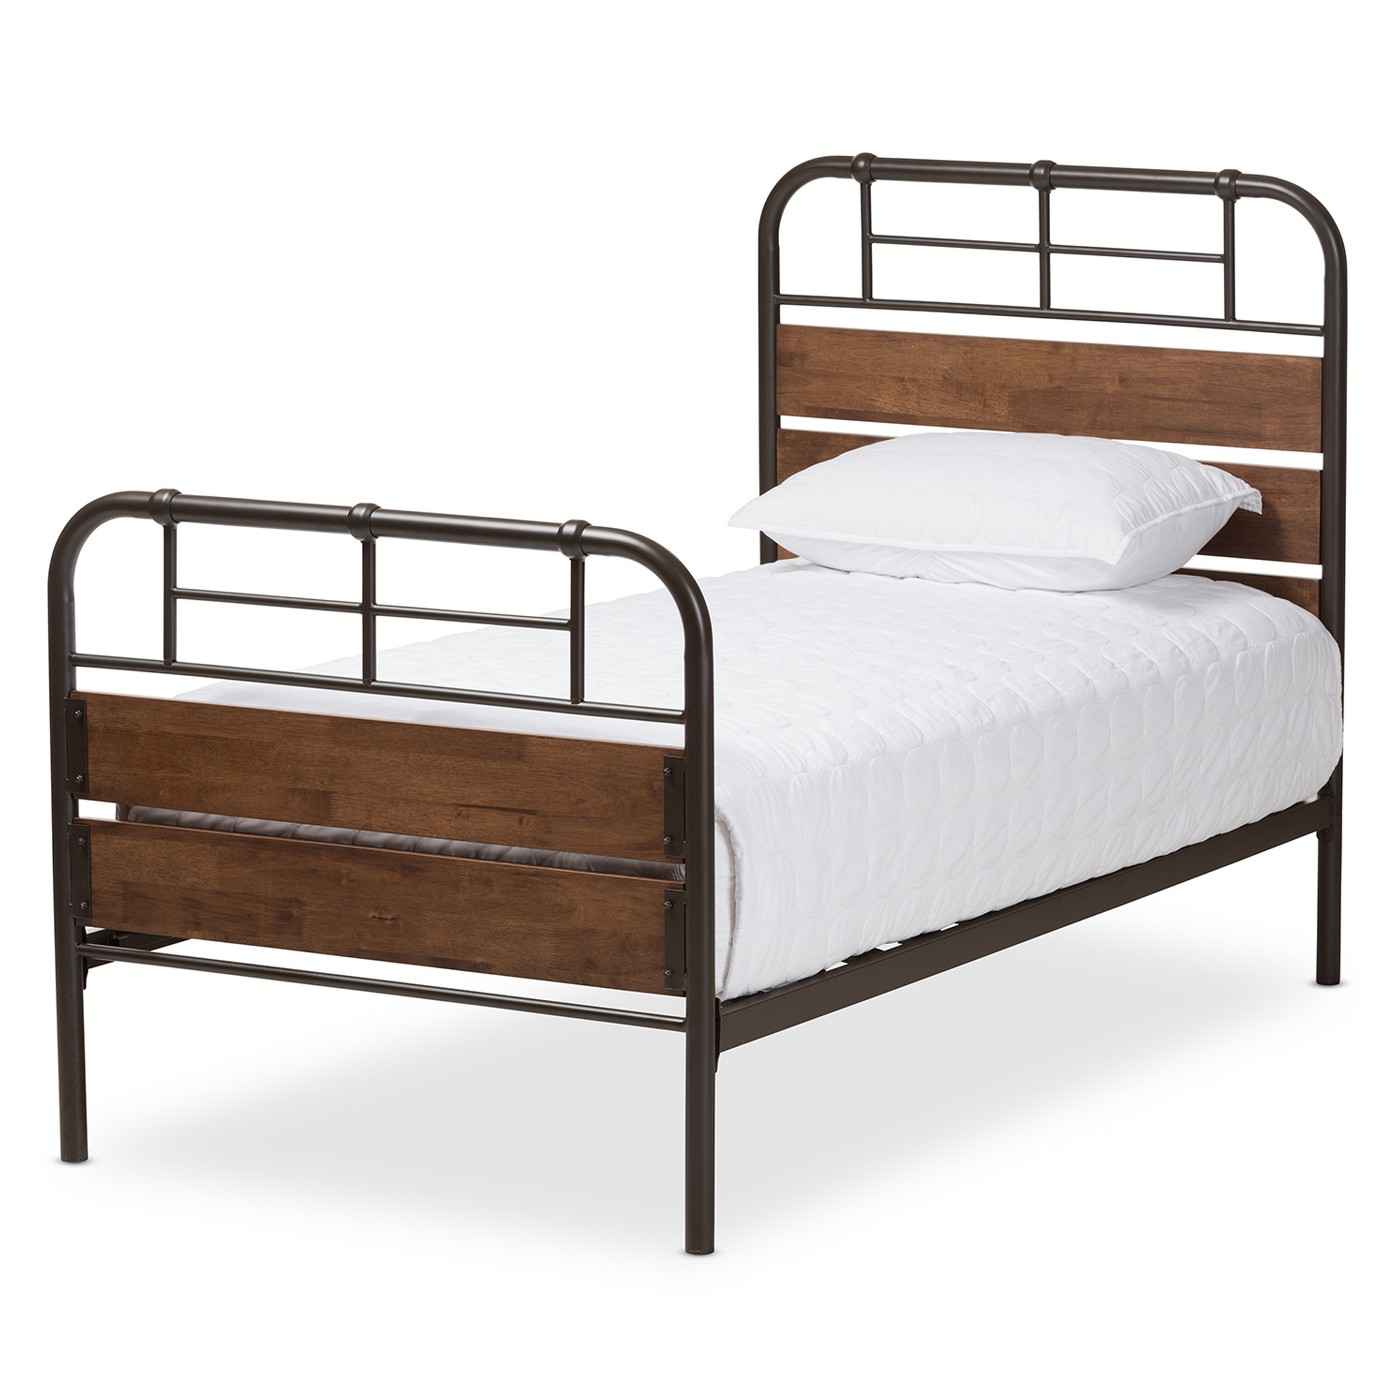 Monoco Metal and Wood Bed